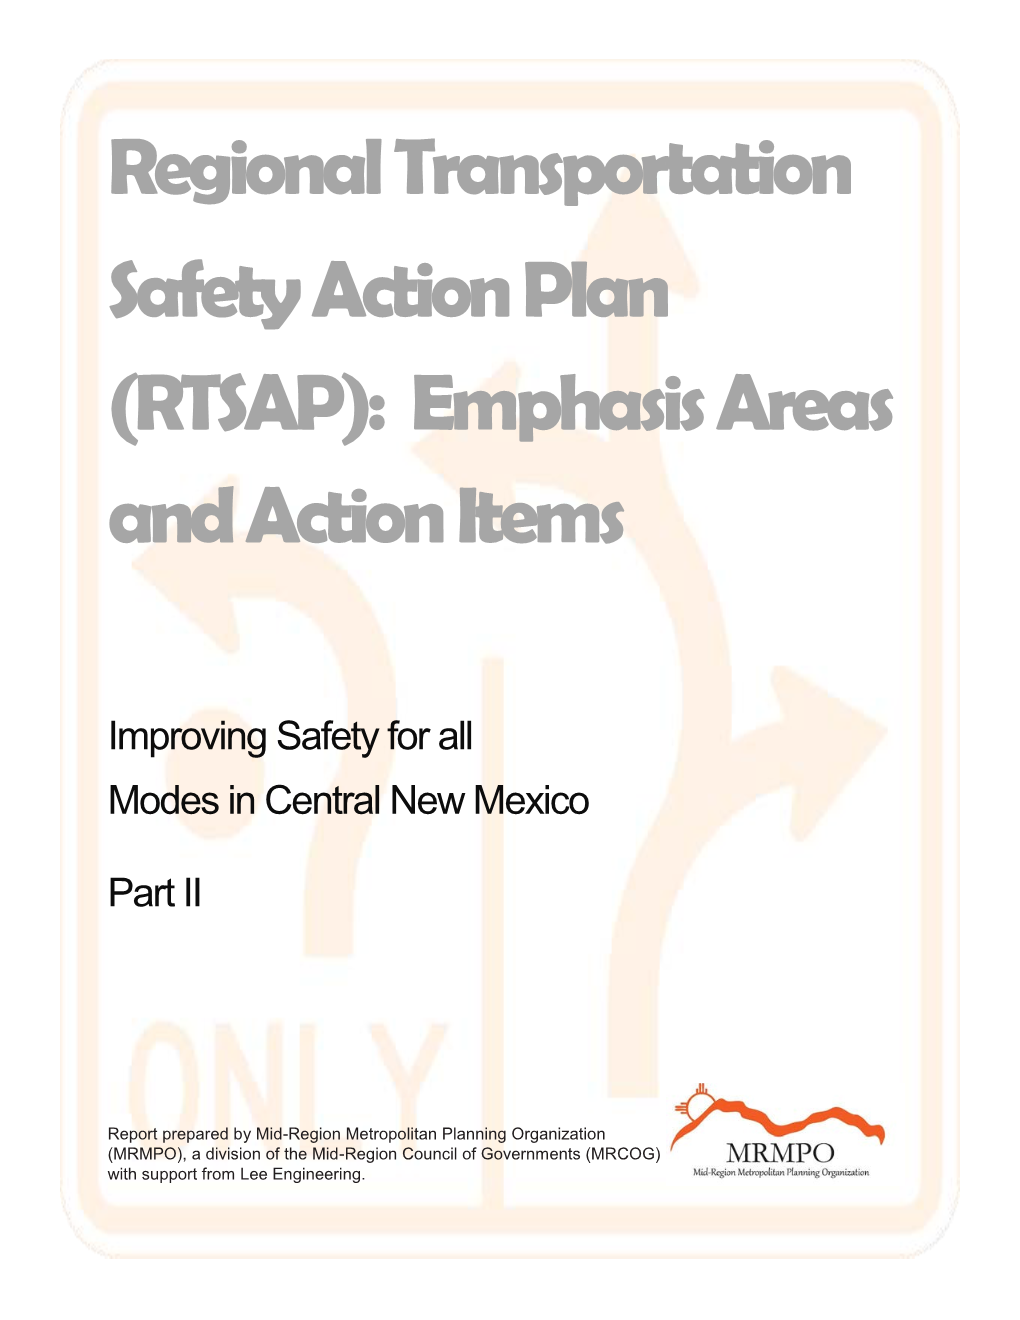 Regional Transportation Safety Action Plan (RTSAP): Emphasis Areas and Action Items